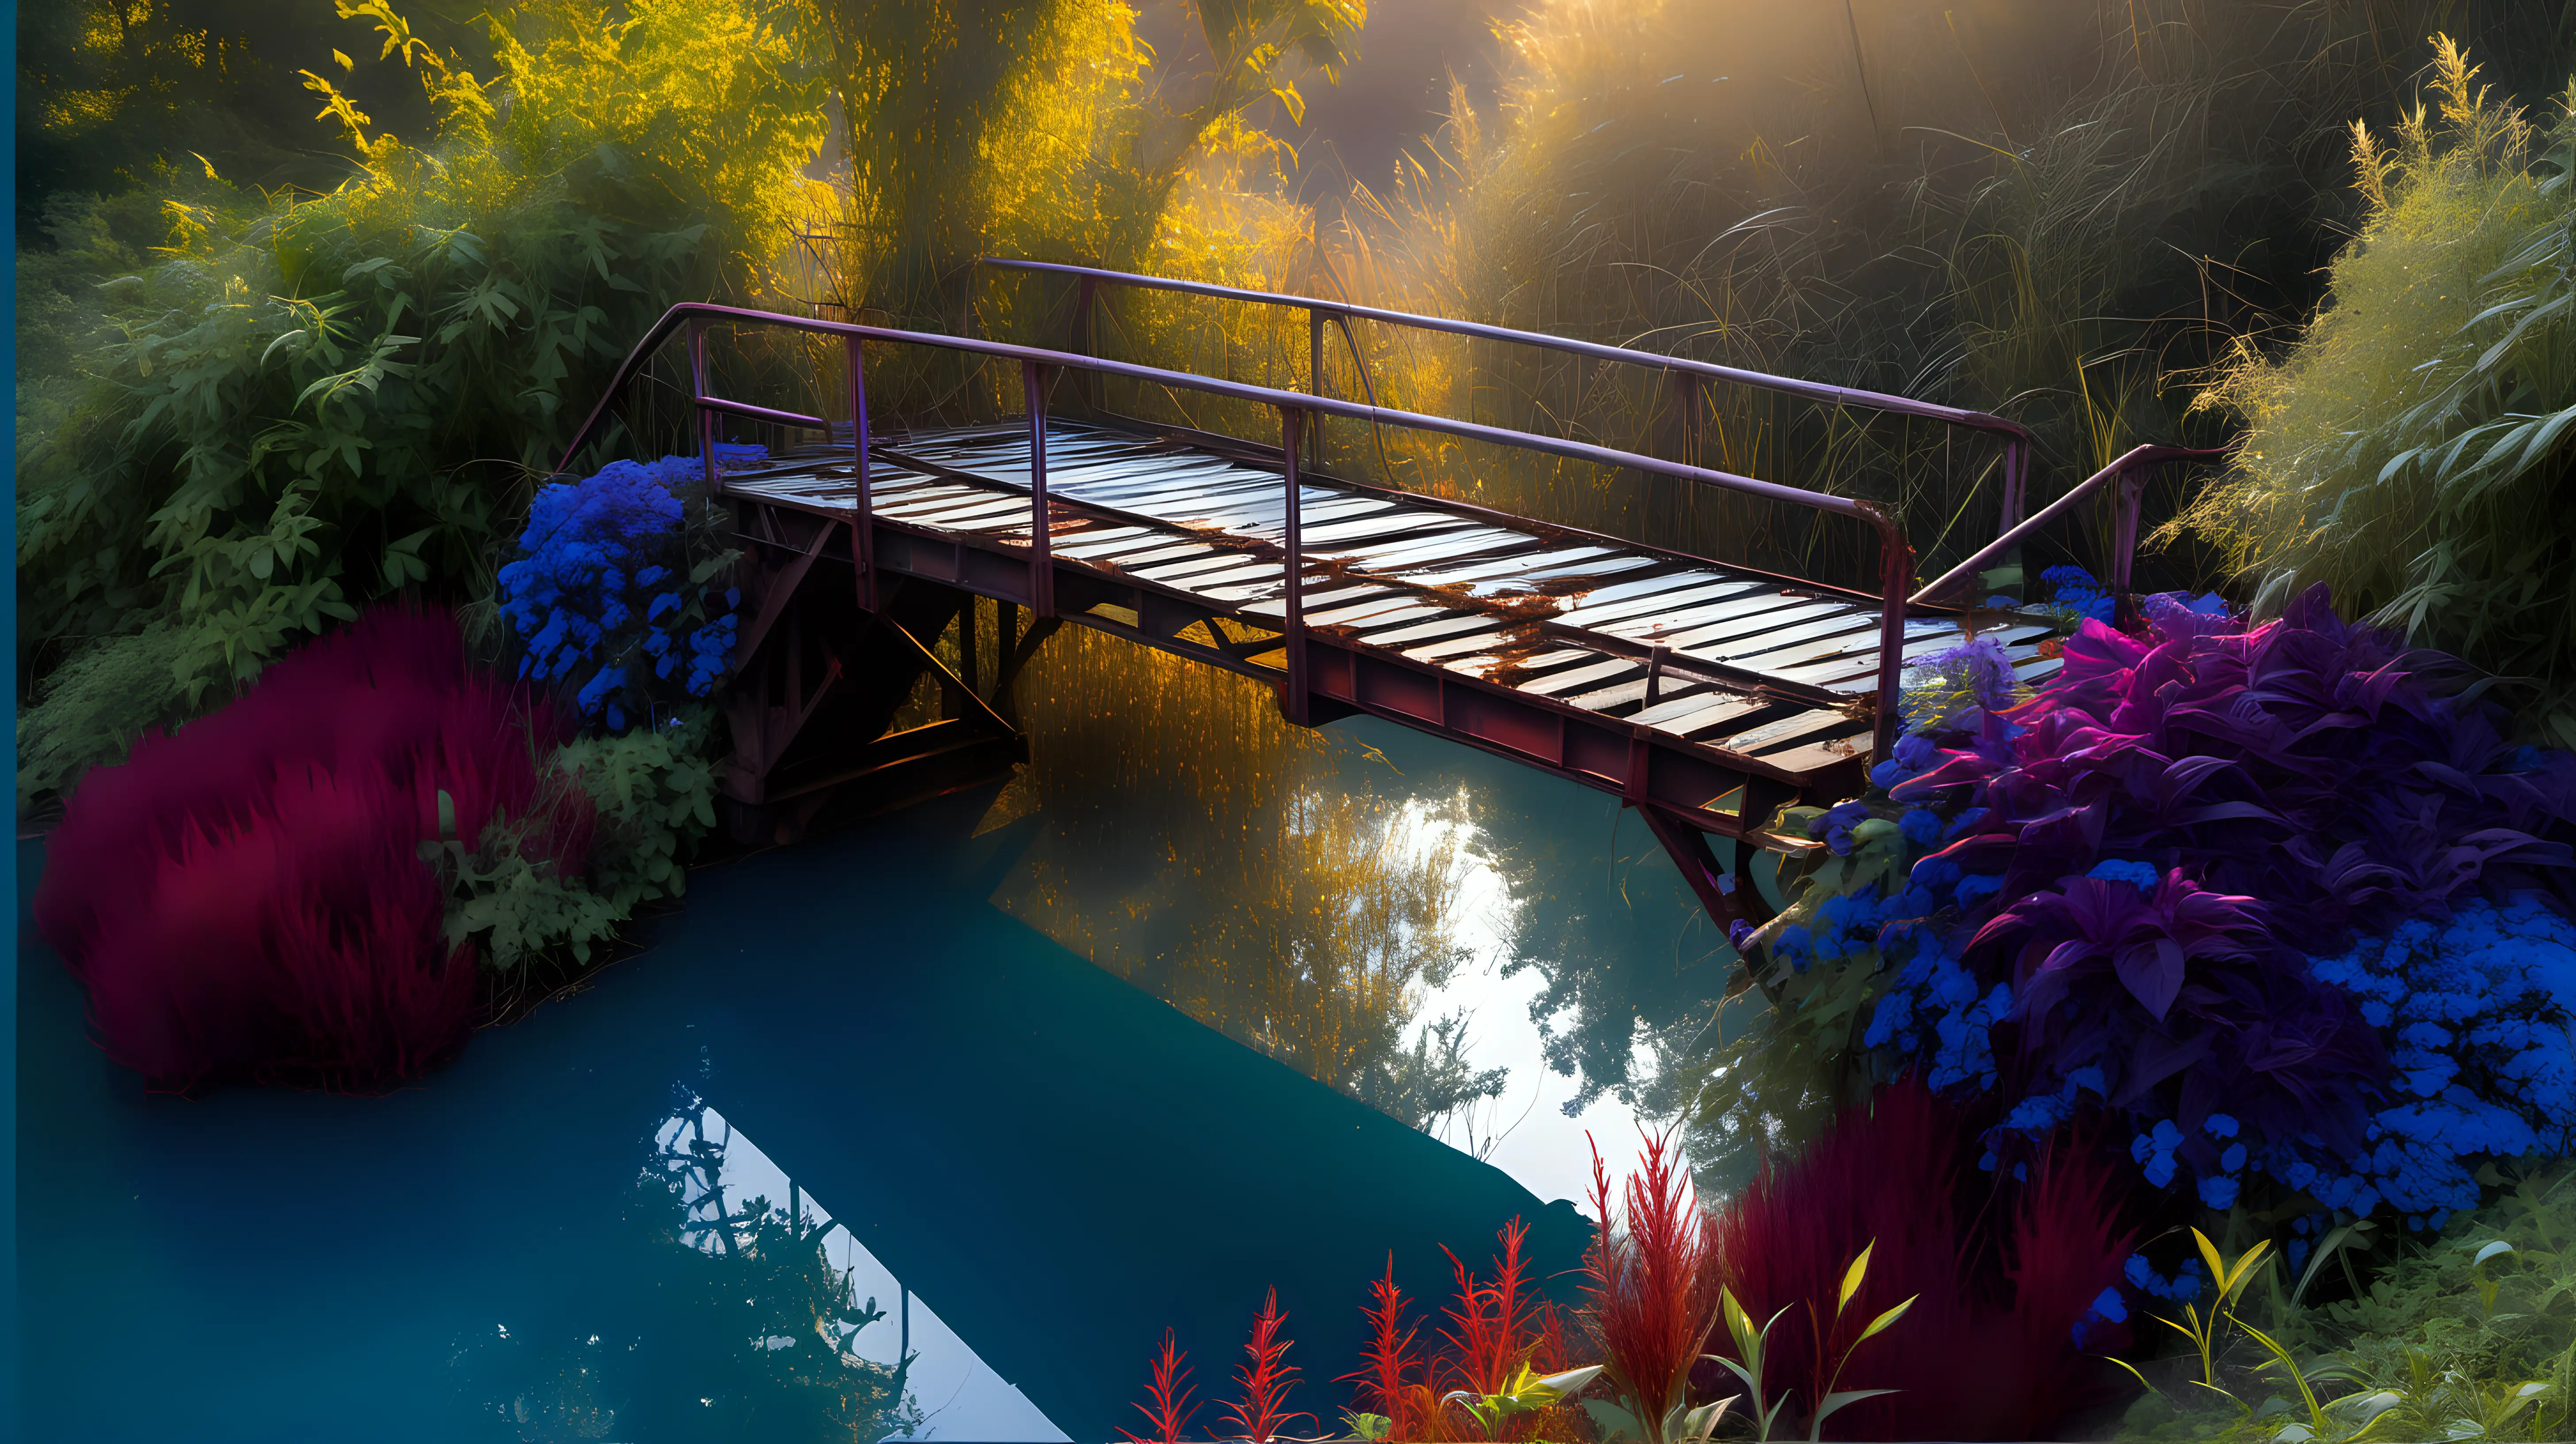 OLD RUSTY BRIDGE INFESTED WITH BLUE, RED, AND PURPLE GARDEN PLANTS, RIGHT-HAND SIDE, GOLDEN SUNLIGHT, BLUE CLEAR WATER